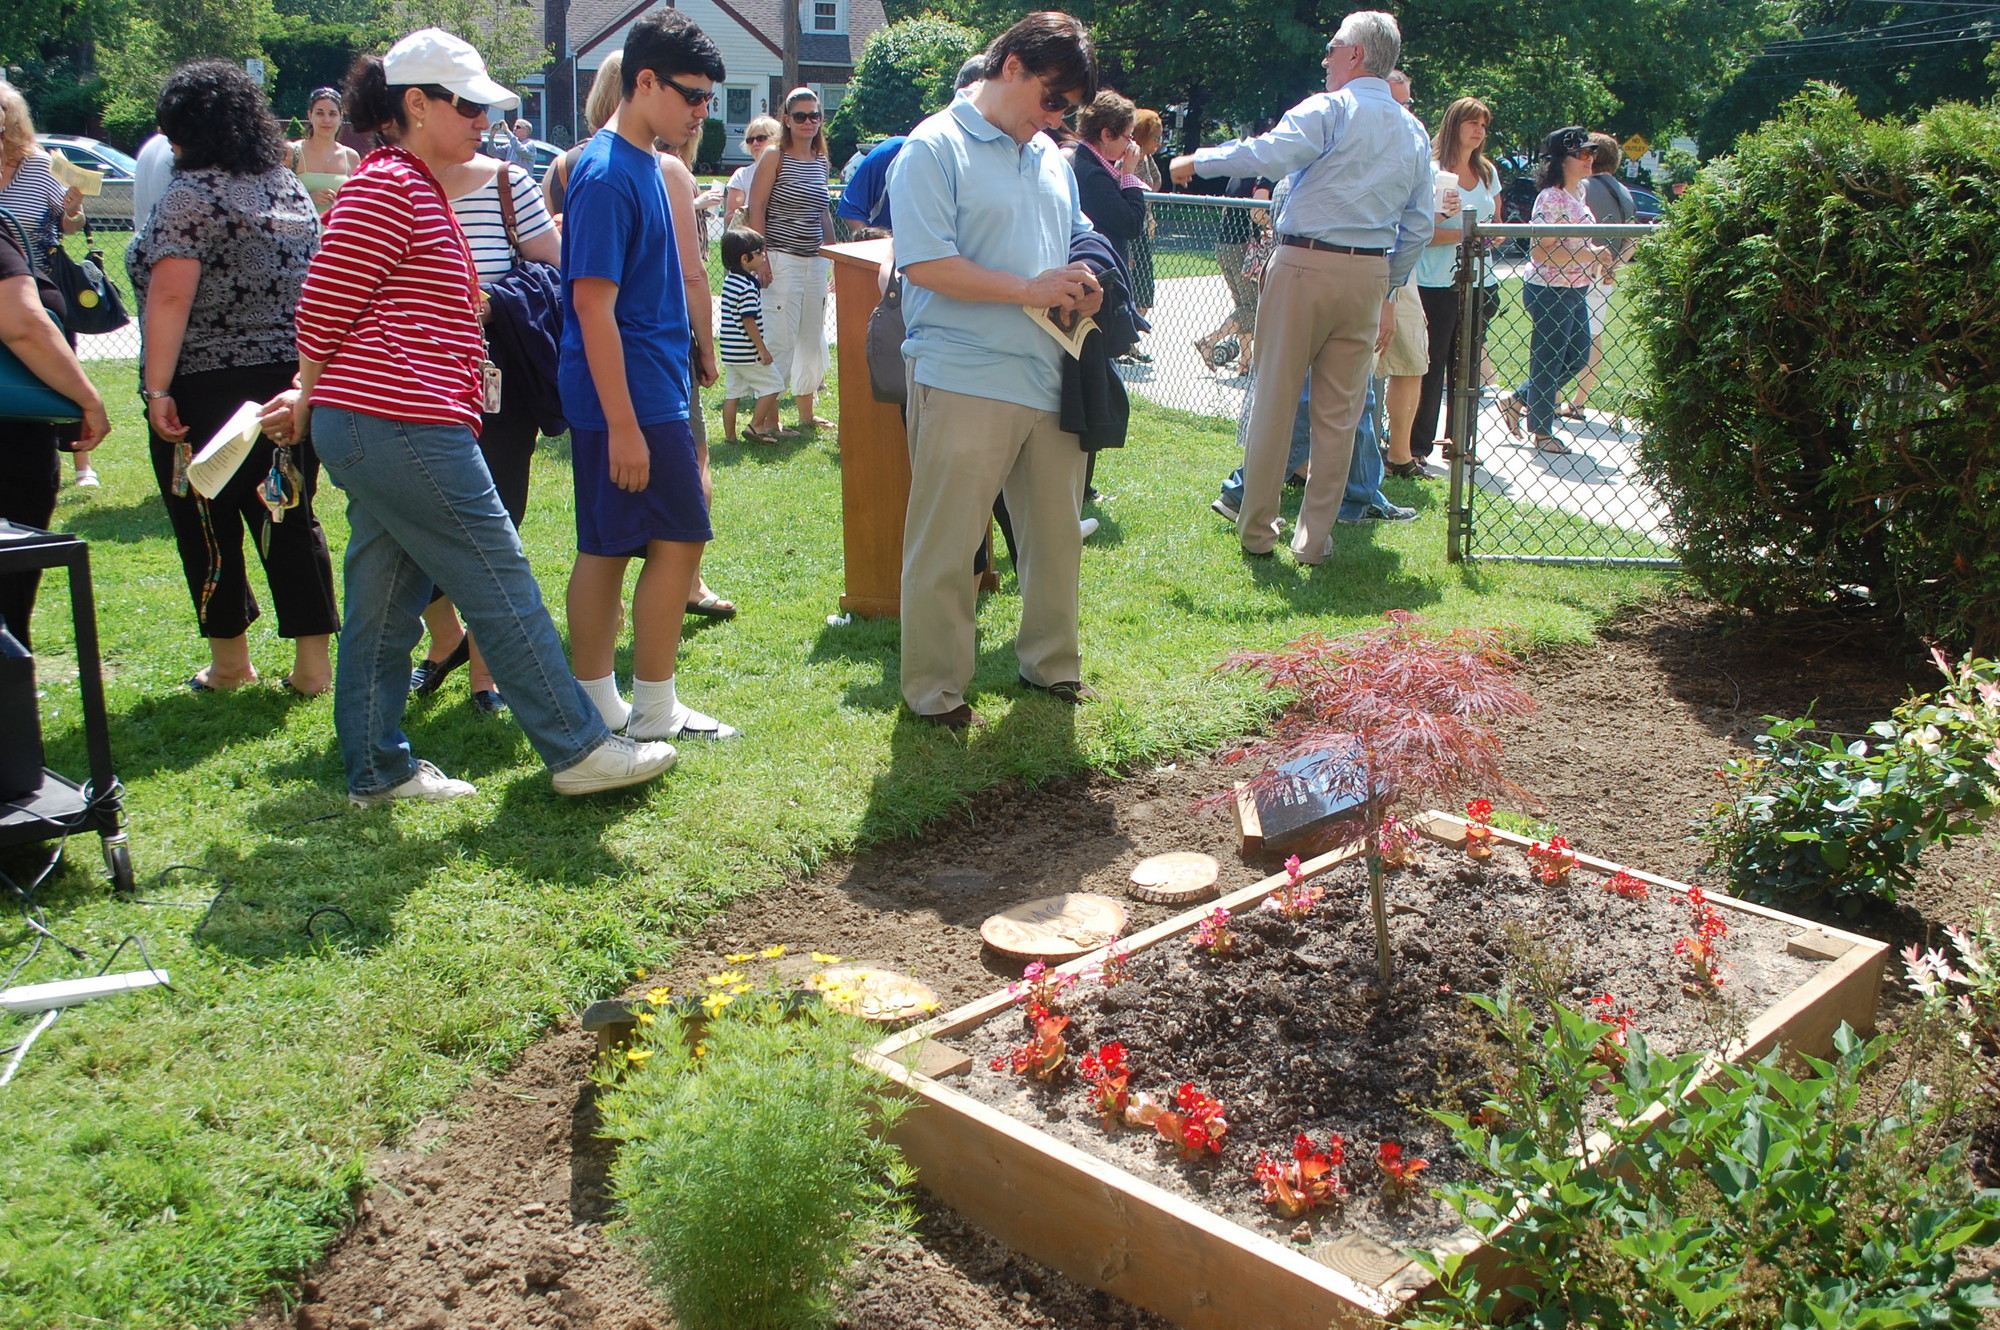 Guests at last Saturday morning’s ceremony look over the garden built outside of Memorial Junior High School in honor of former teacher Stephanie Ginsberg.